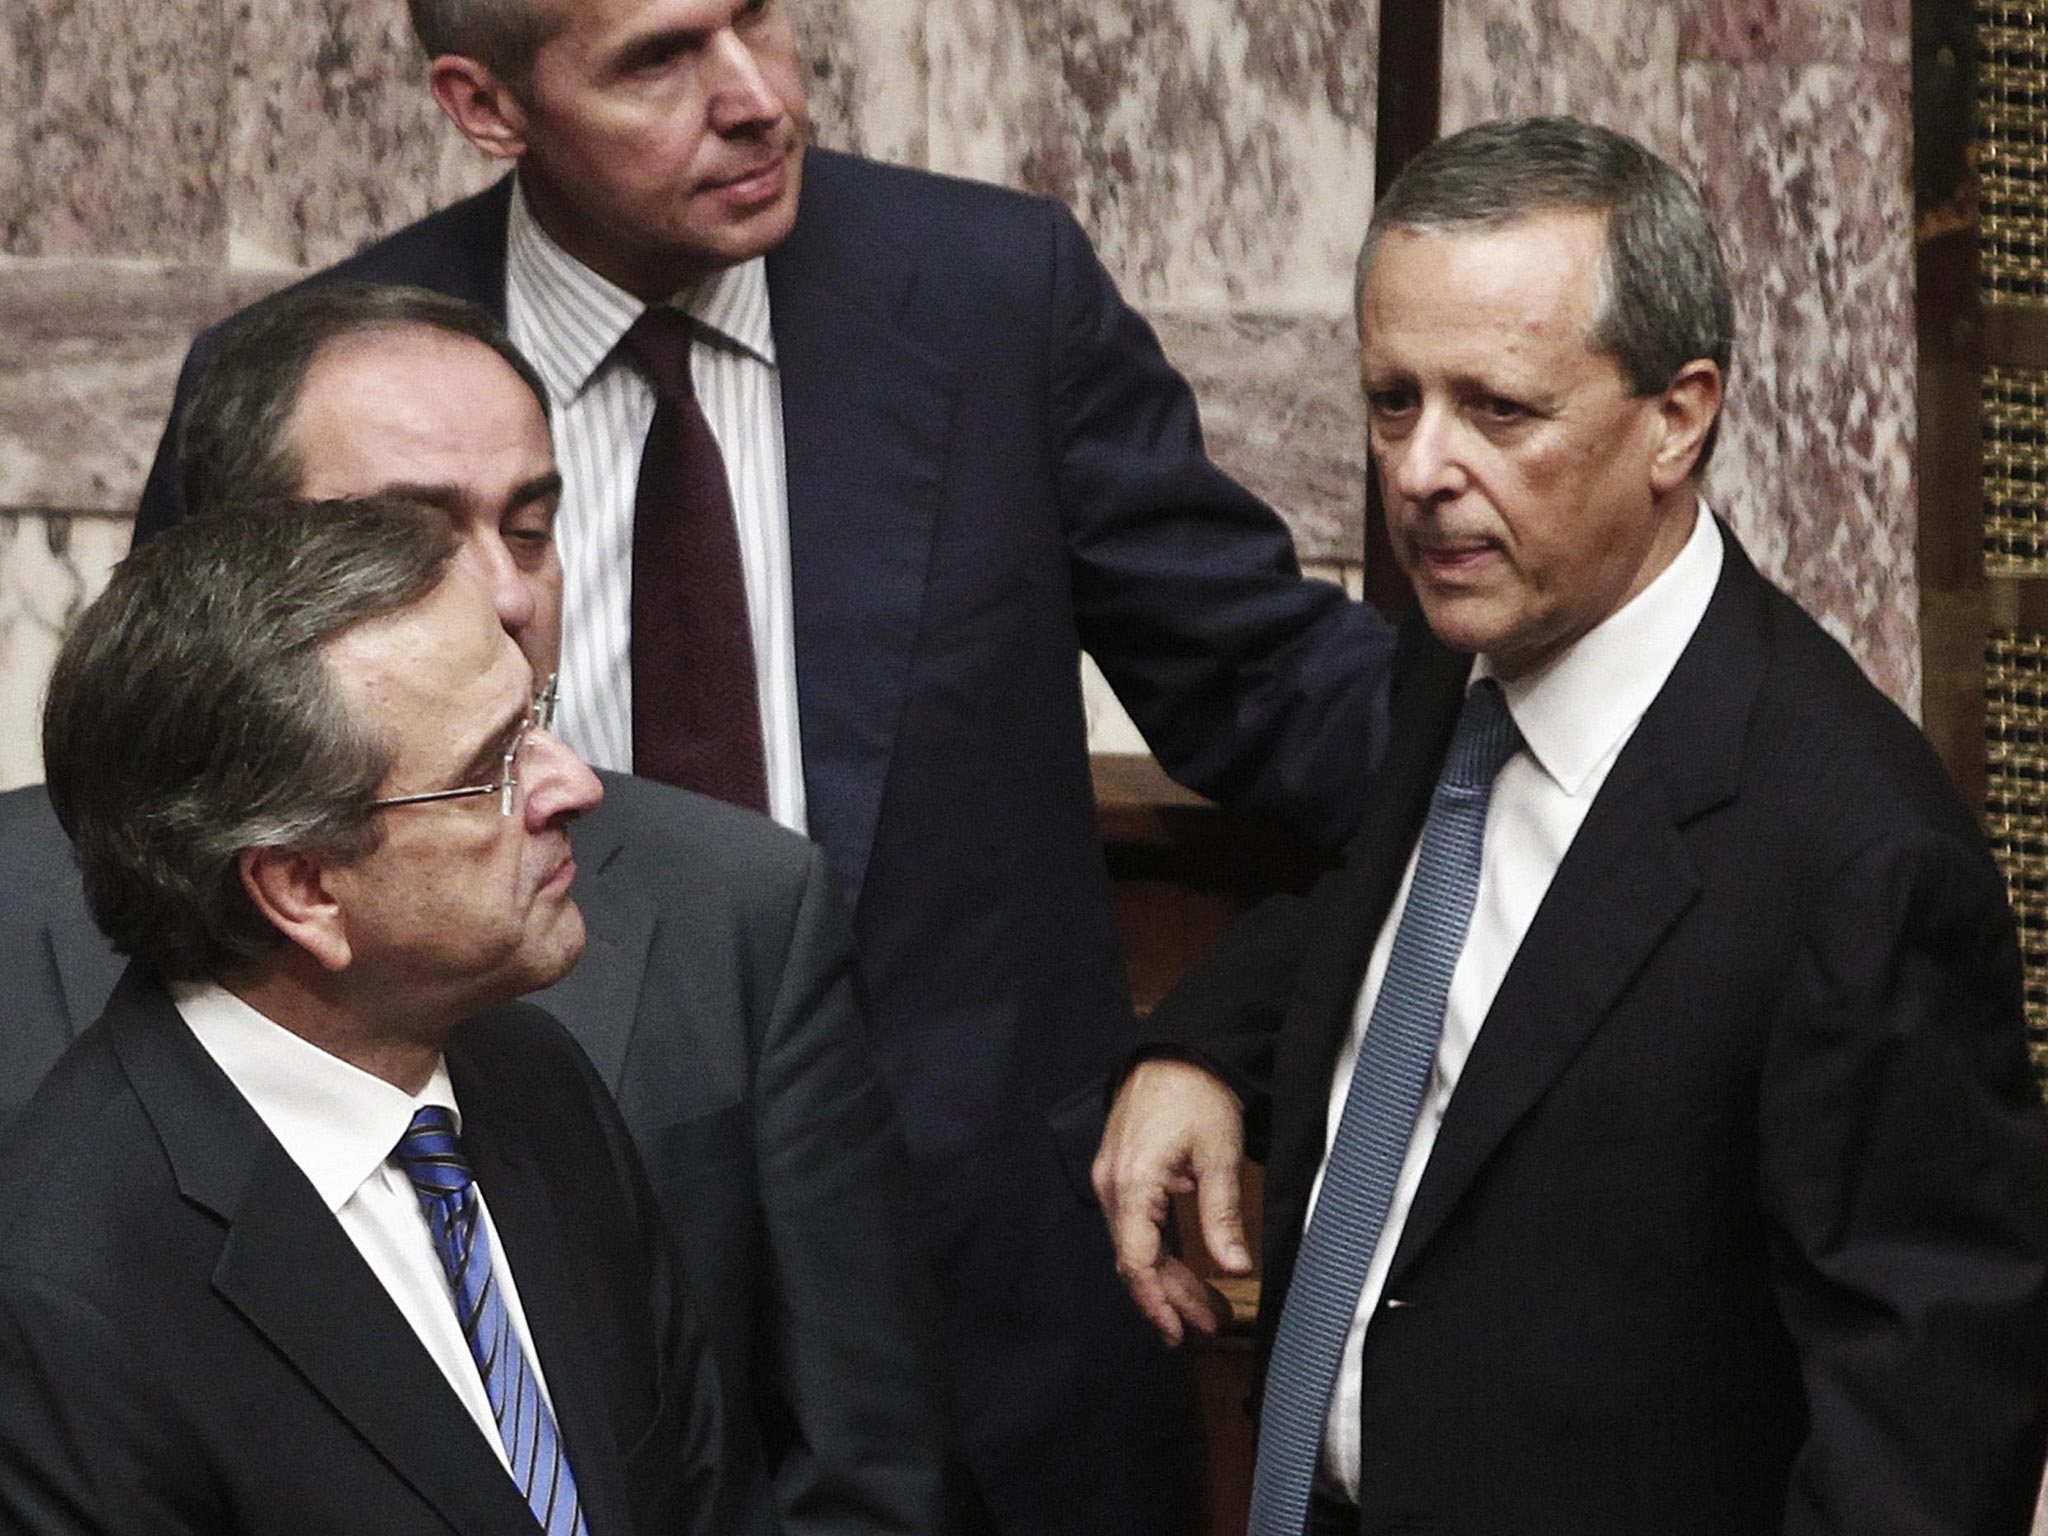 Government Secretary General Takis Baltakos (right) admitted in the video recording the government's intervention in the country's judicial process to elicit prosecutions of Golden Dawn lawmakers